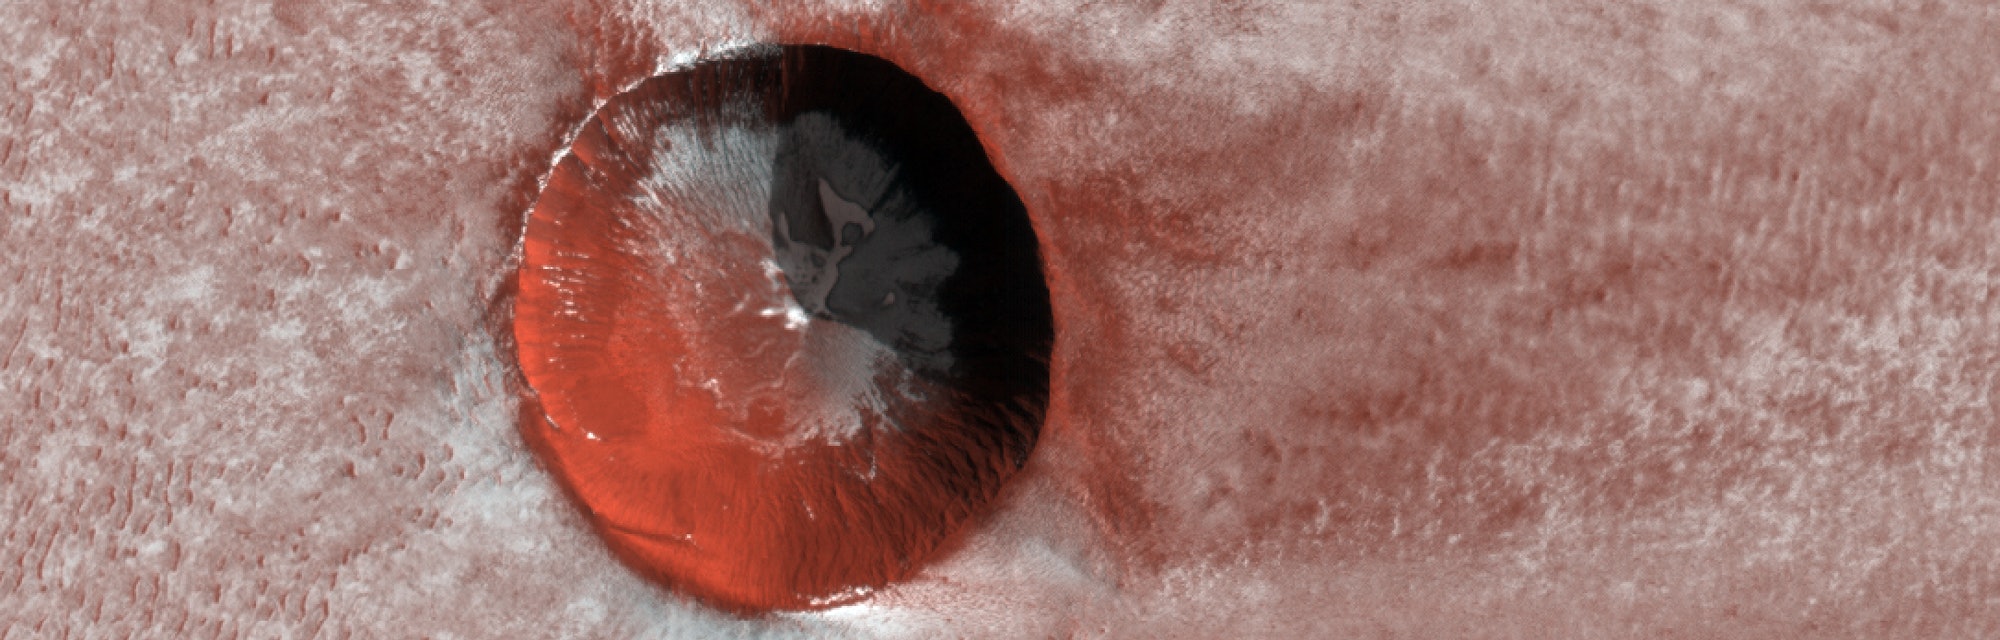 NASA's Mars Reconnaissance Orbiter imaged this relatively young, ice-filled crater near the north po...